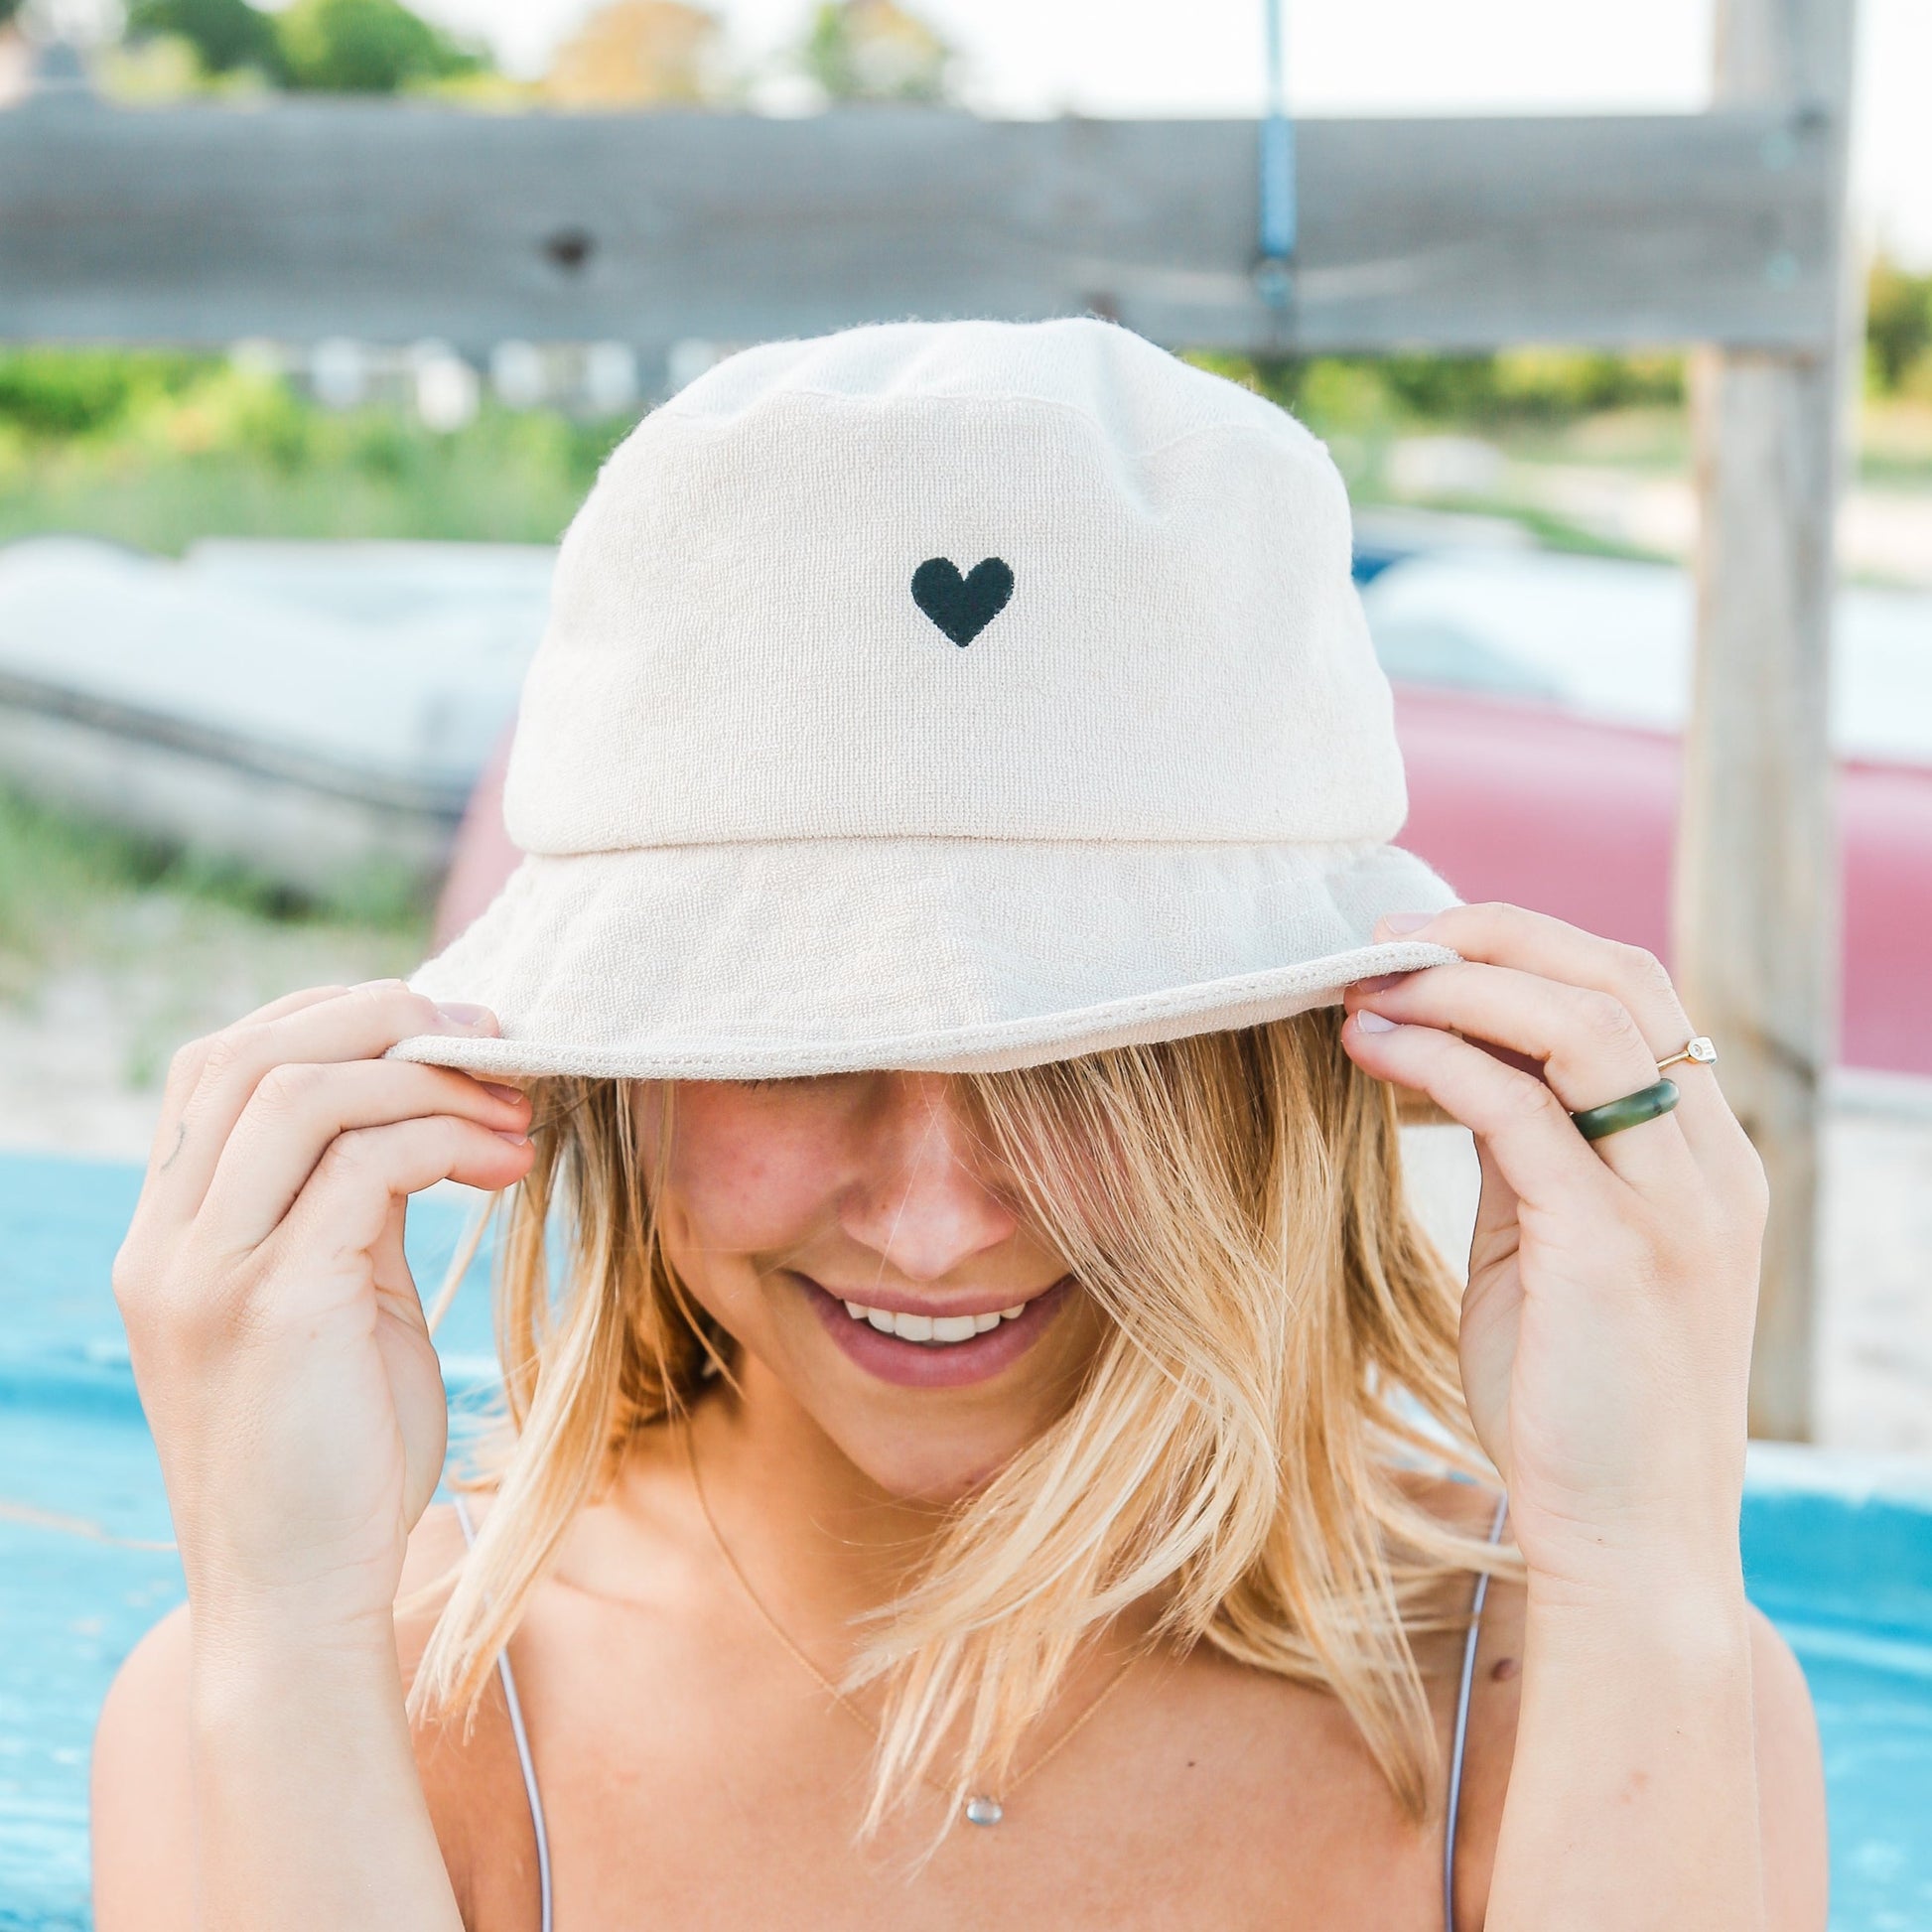 Atticus Poetry Bucket Hat, Love Her But Leave Her Wild - Trendy Summer Girl Terry Cloth Cap, Sun Hats for Women, One Size (Khaki, Heart)